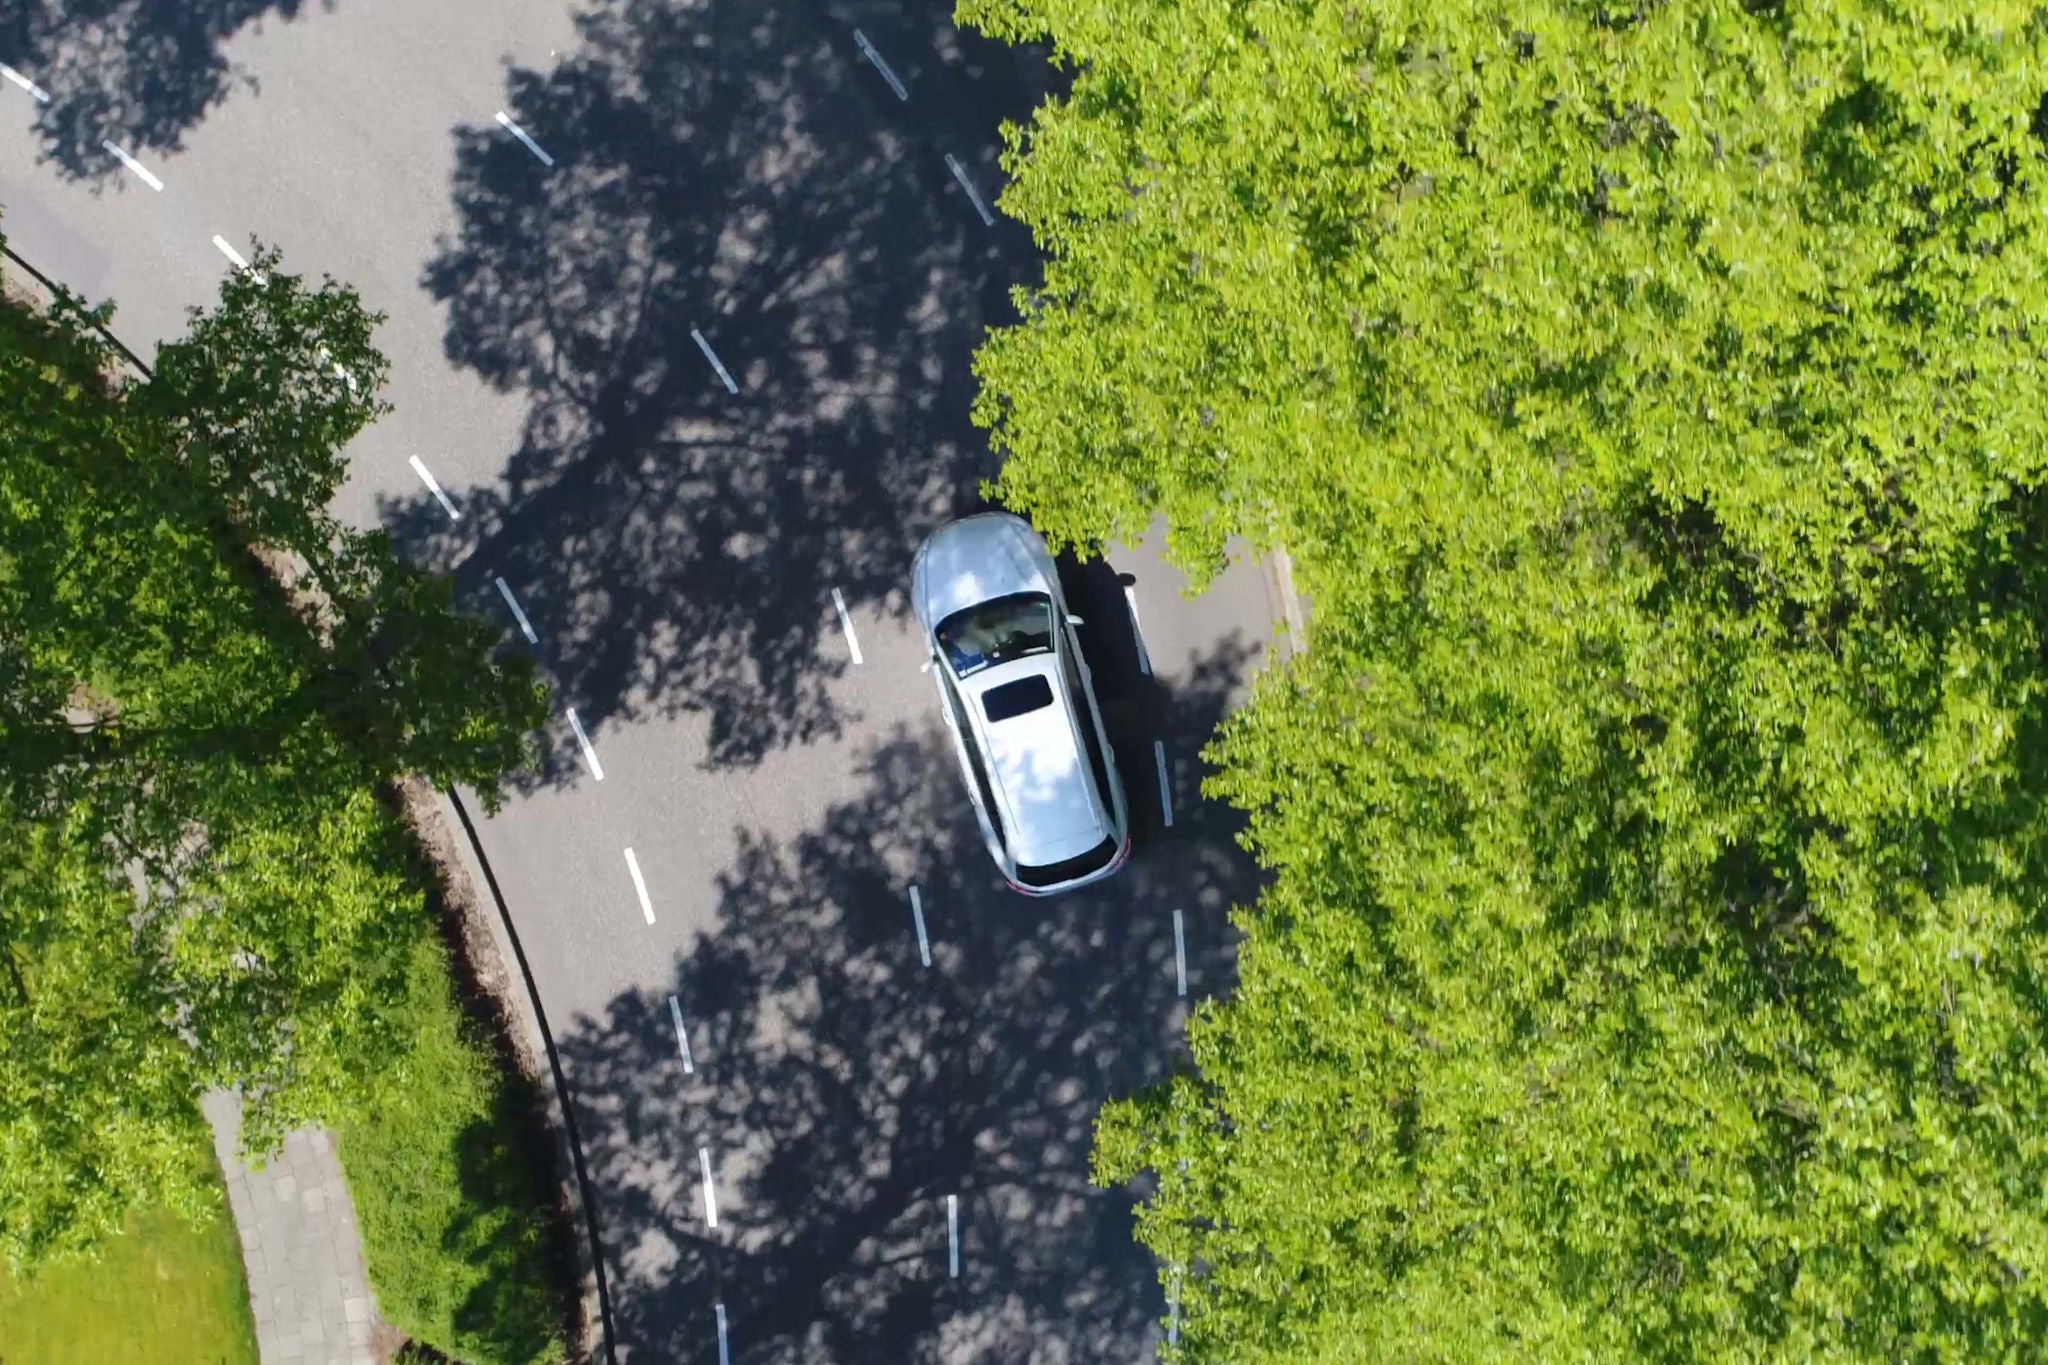 Aerial following car top-down view this grey colored station wagon is driving over two way street corner green trees on both sides of street; Shutterstock ID 655475707; charge: 67387960; job: A6169 - AM&M Business Minute podcast EP27; name: Charles Brewer; email: charles.brewer@uk.ey.com